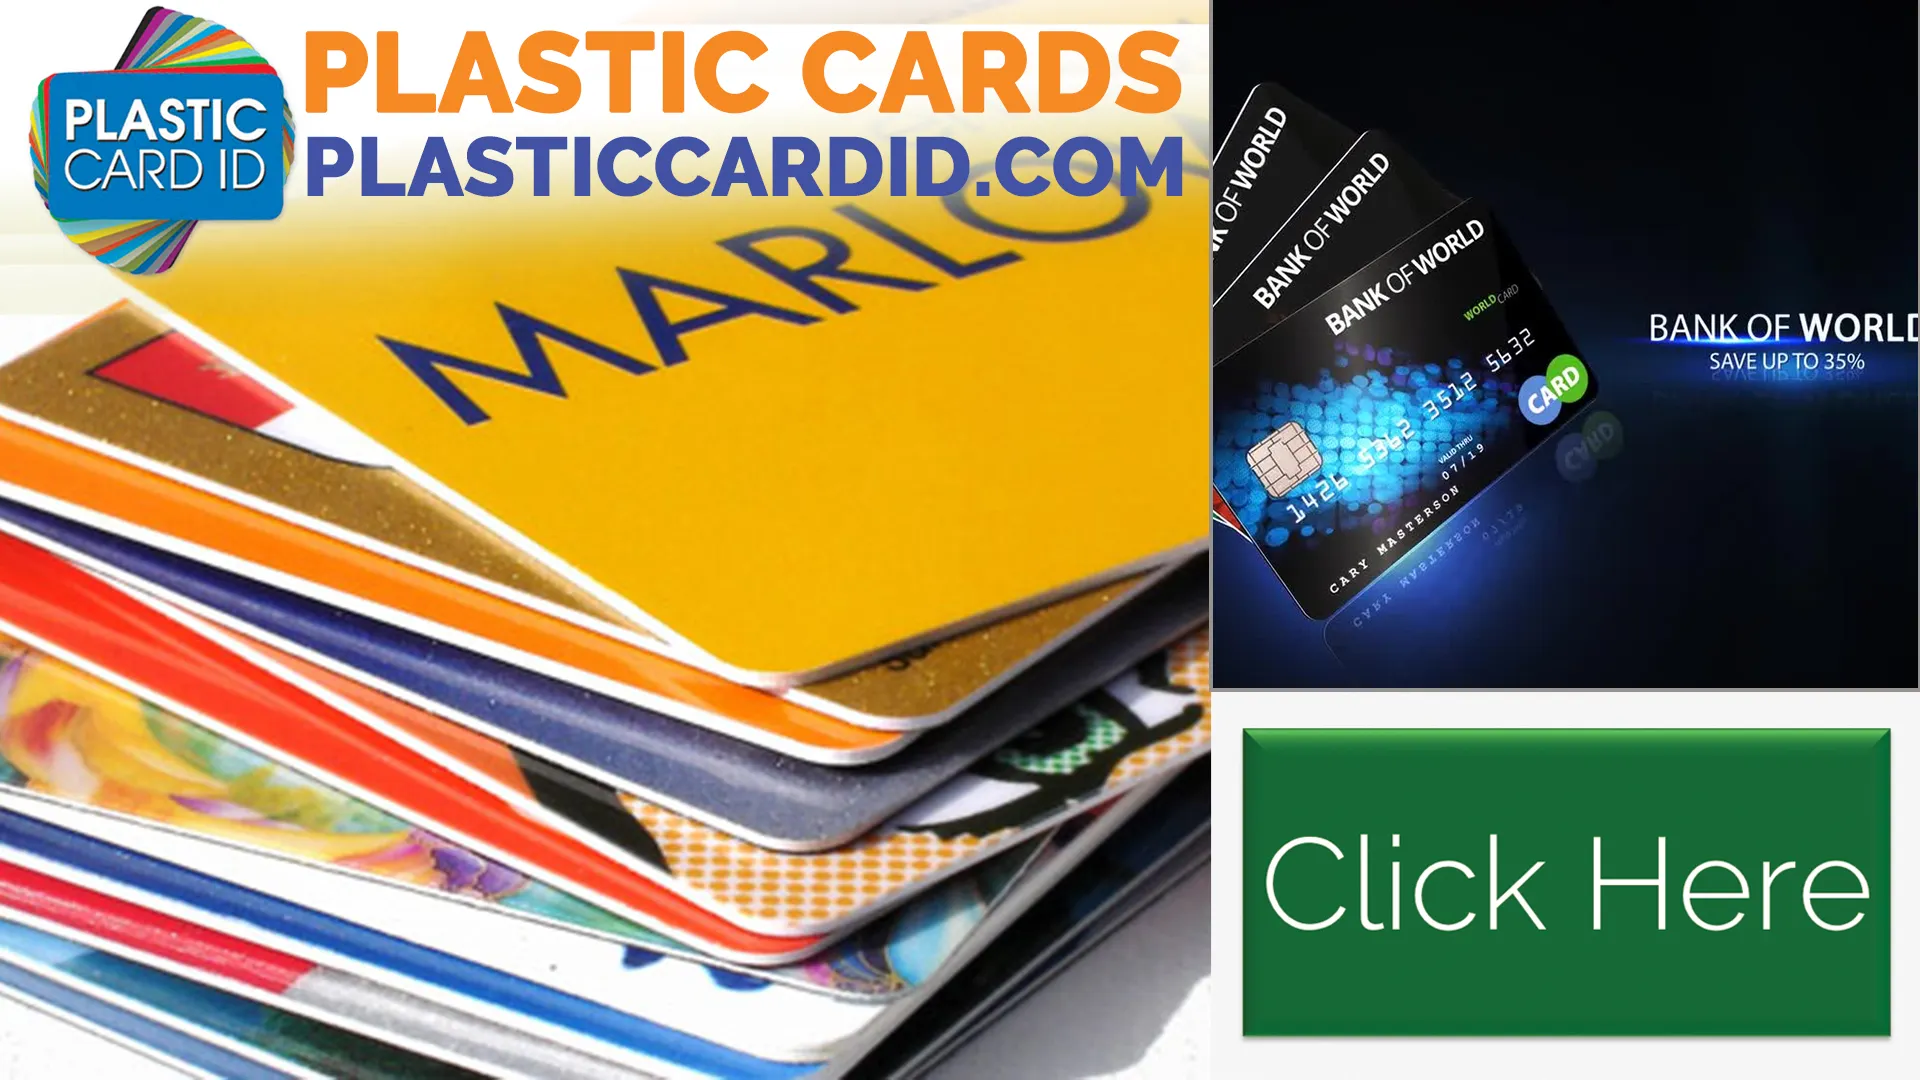 Support at Every Step from Plastic Card ID
